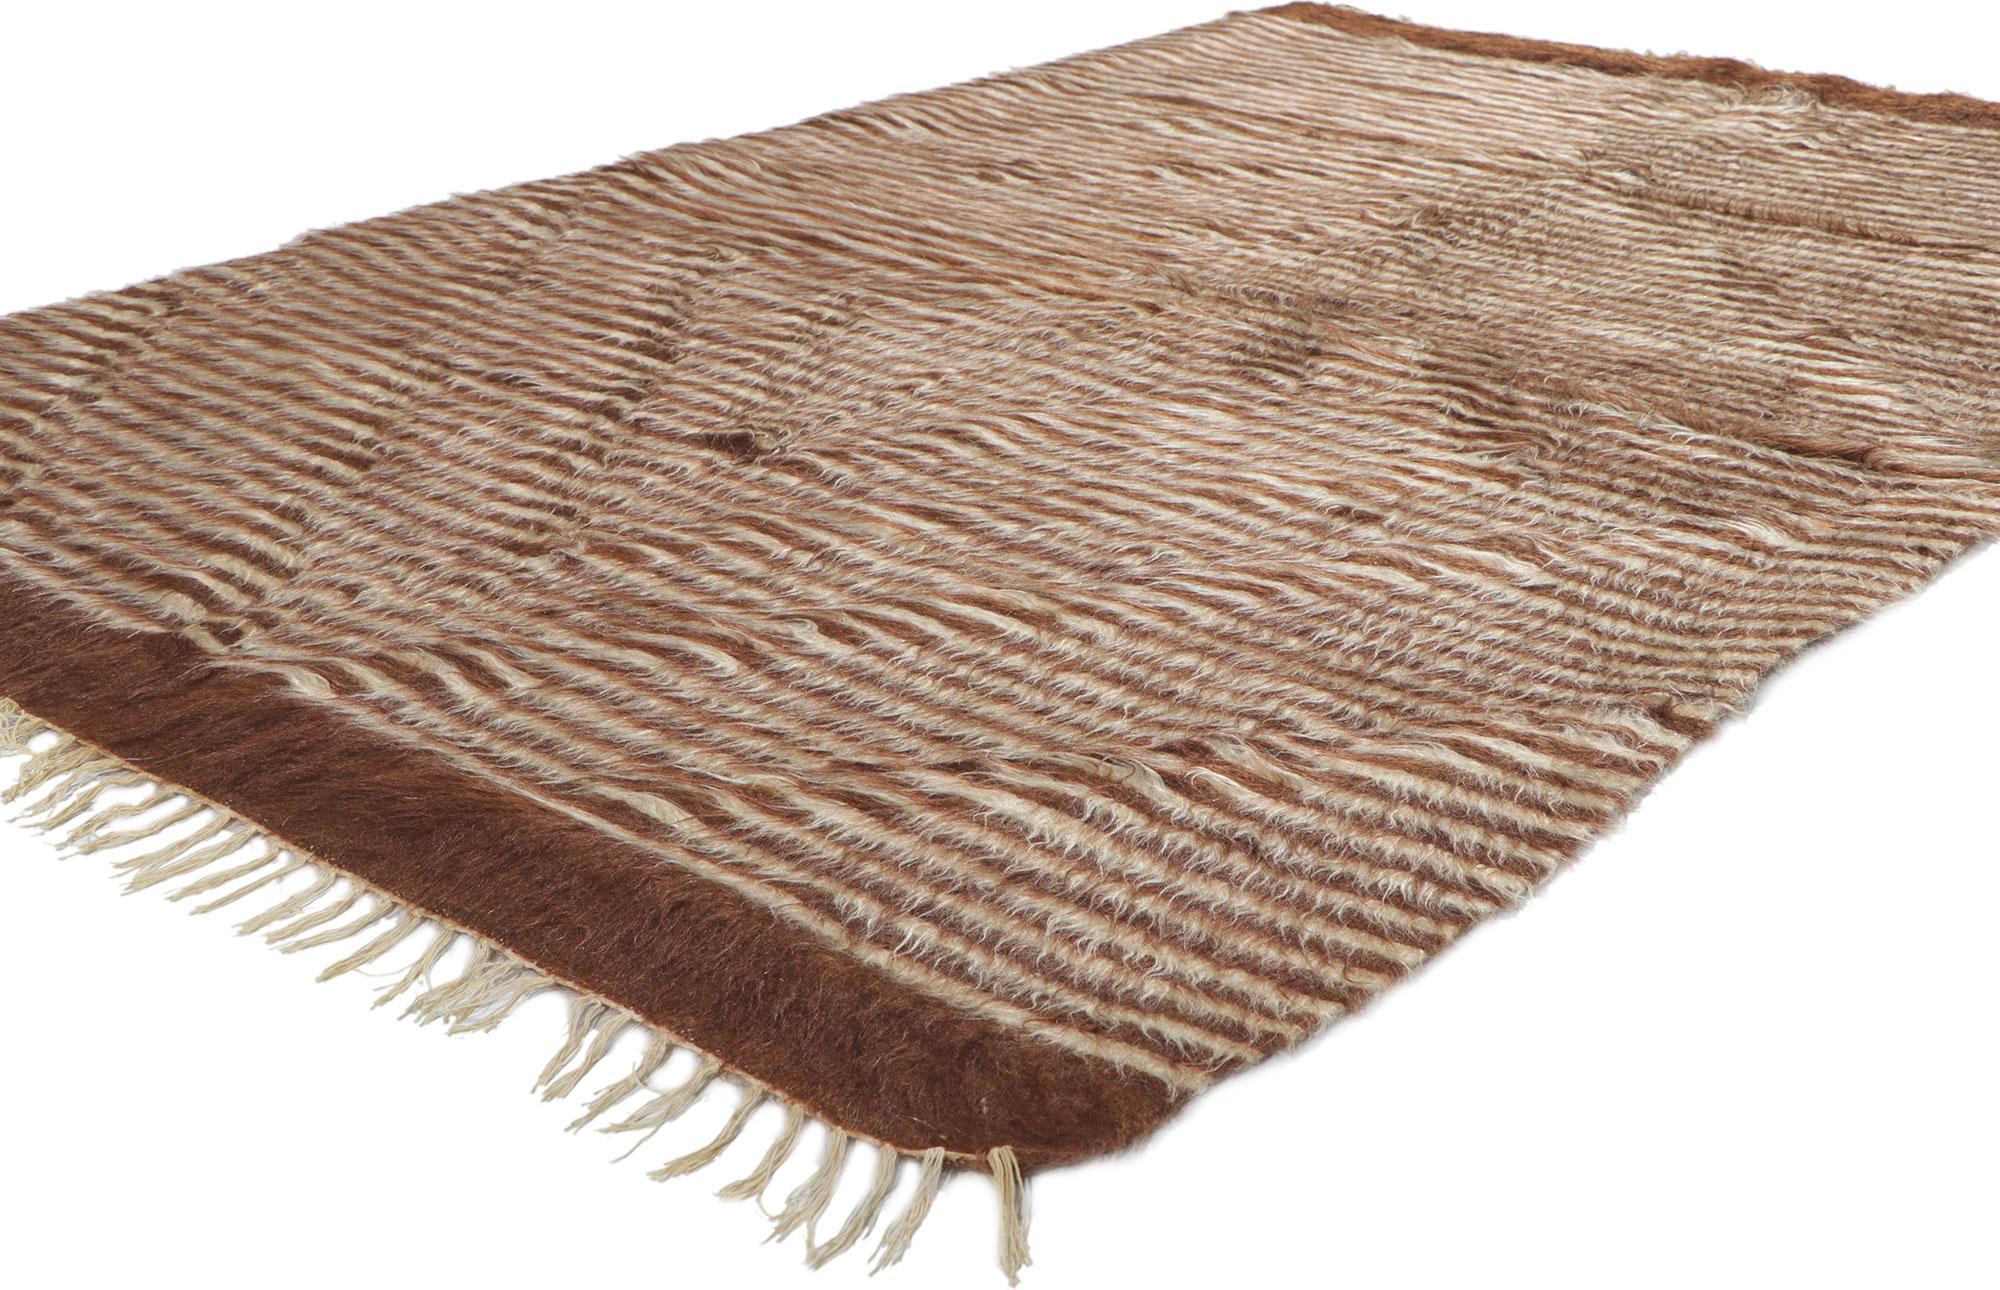 53845 Vintage Turkish Angora Wool Kilim Blanket Rug, 04'04 x 06'06. With its shaggy pile, incredible detail and texture, this handwoven Turkish angora kilim rug is a captivating vision of woven beauty. The eye-catching striped pattern and earthy